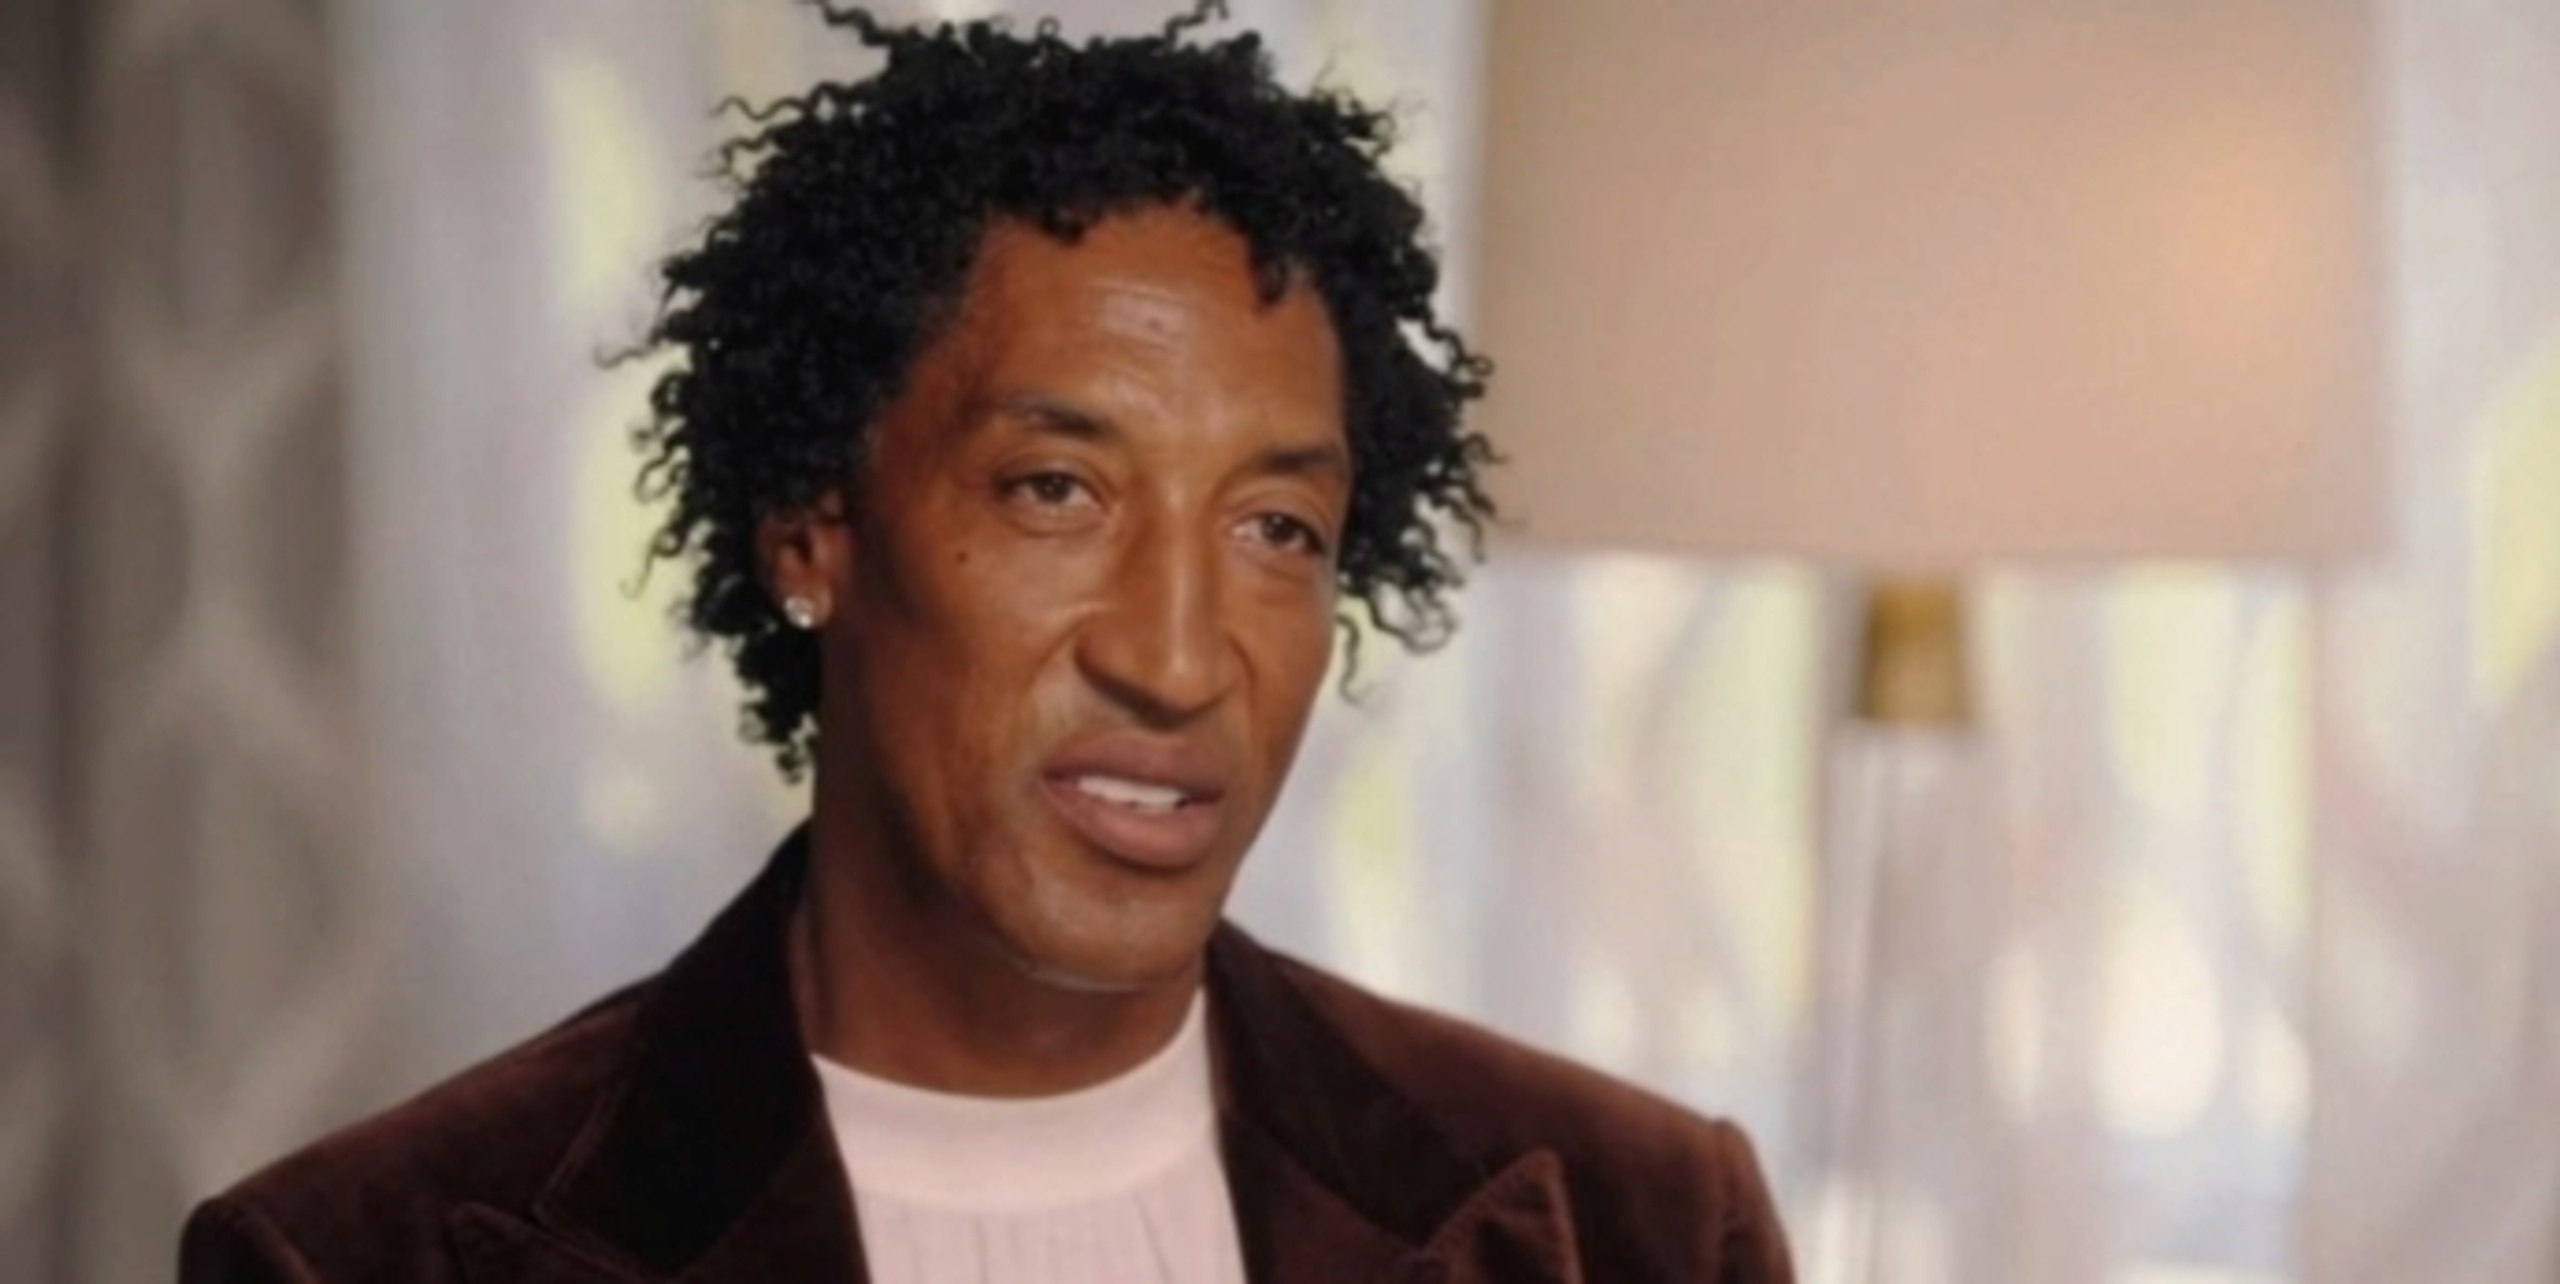 Scottie Pippen says he wishes he could've played with Kobe Bryant